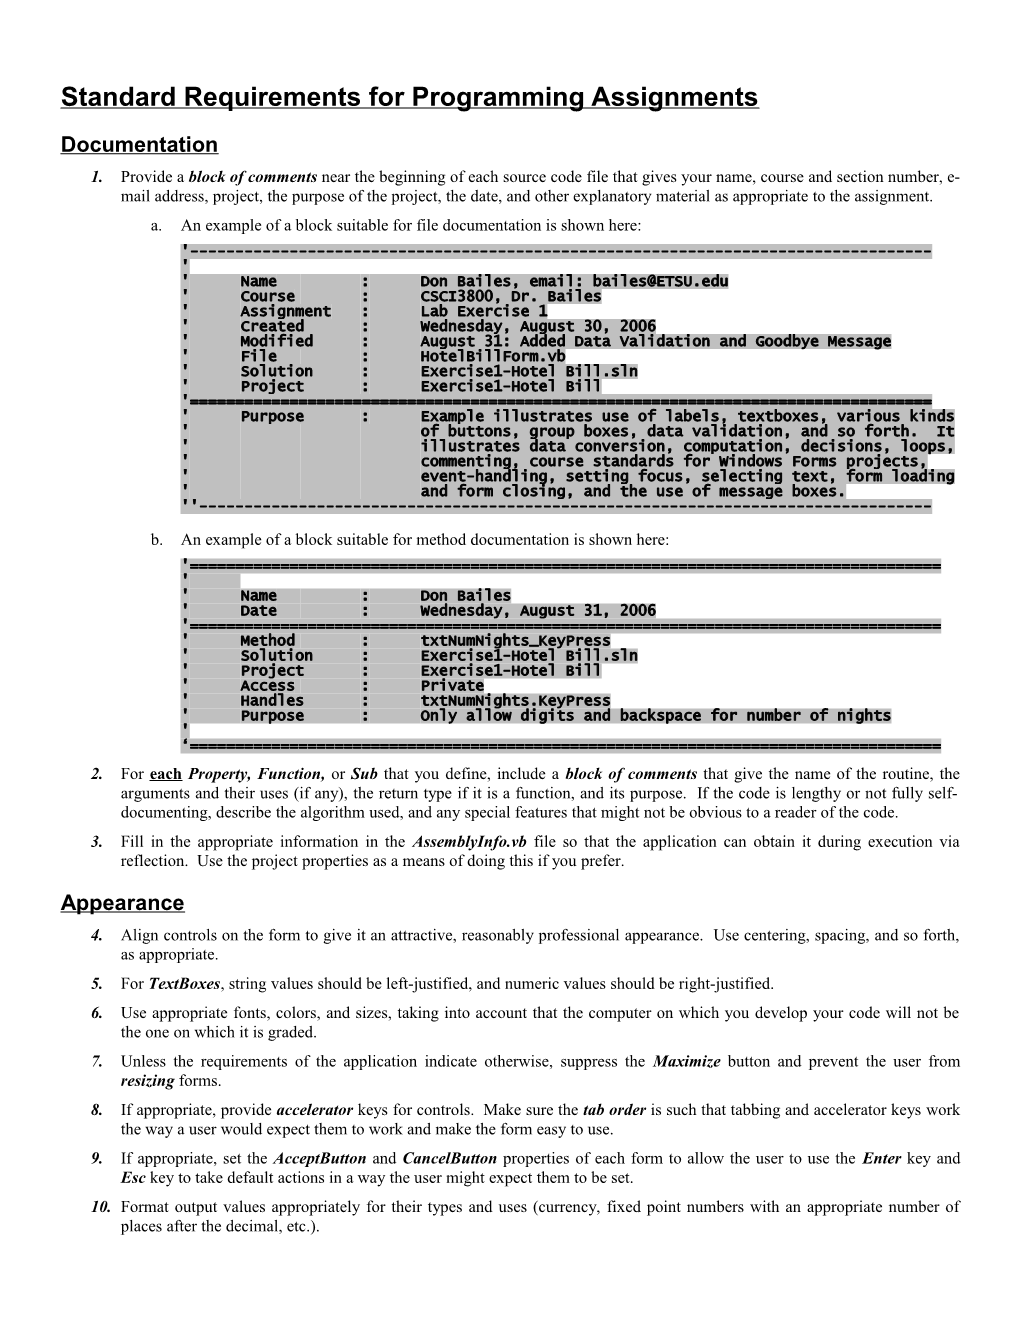 Standard Requirements for CSCI 3800 Programming Assignments